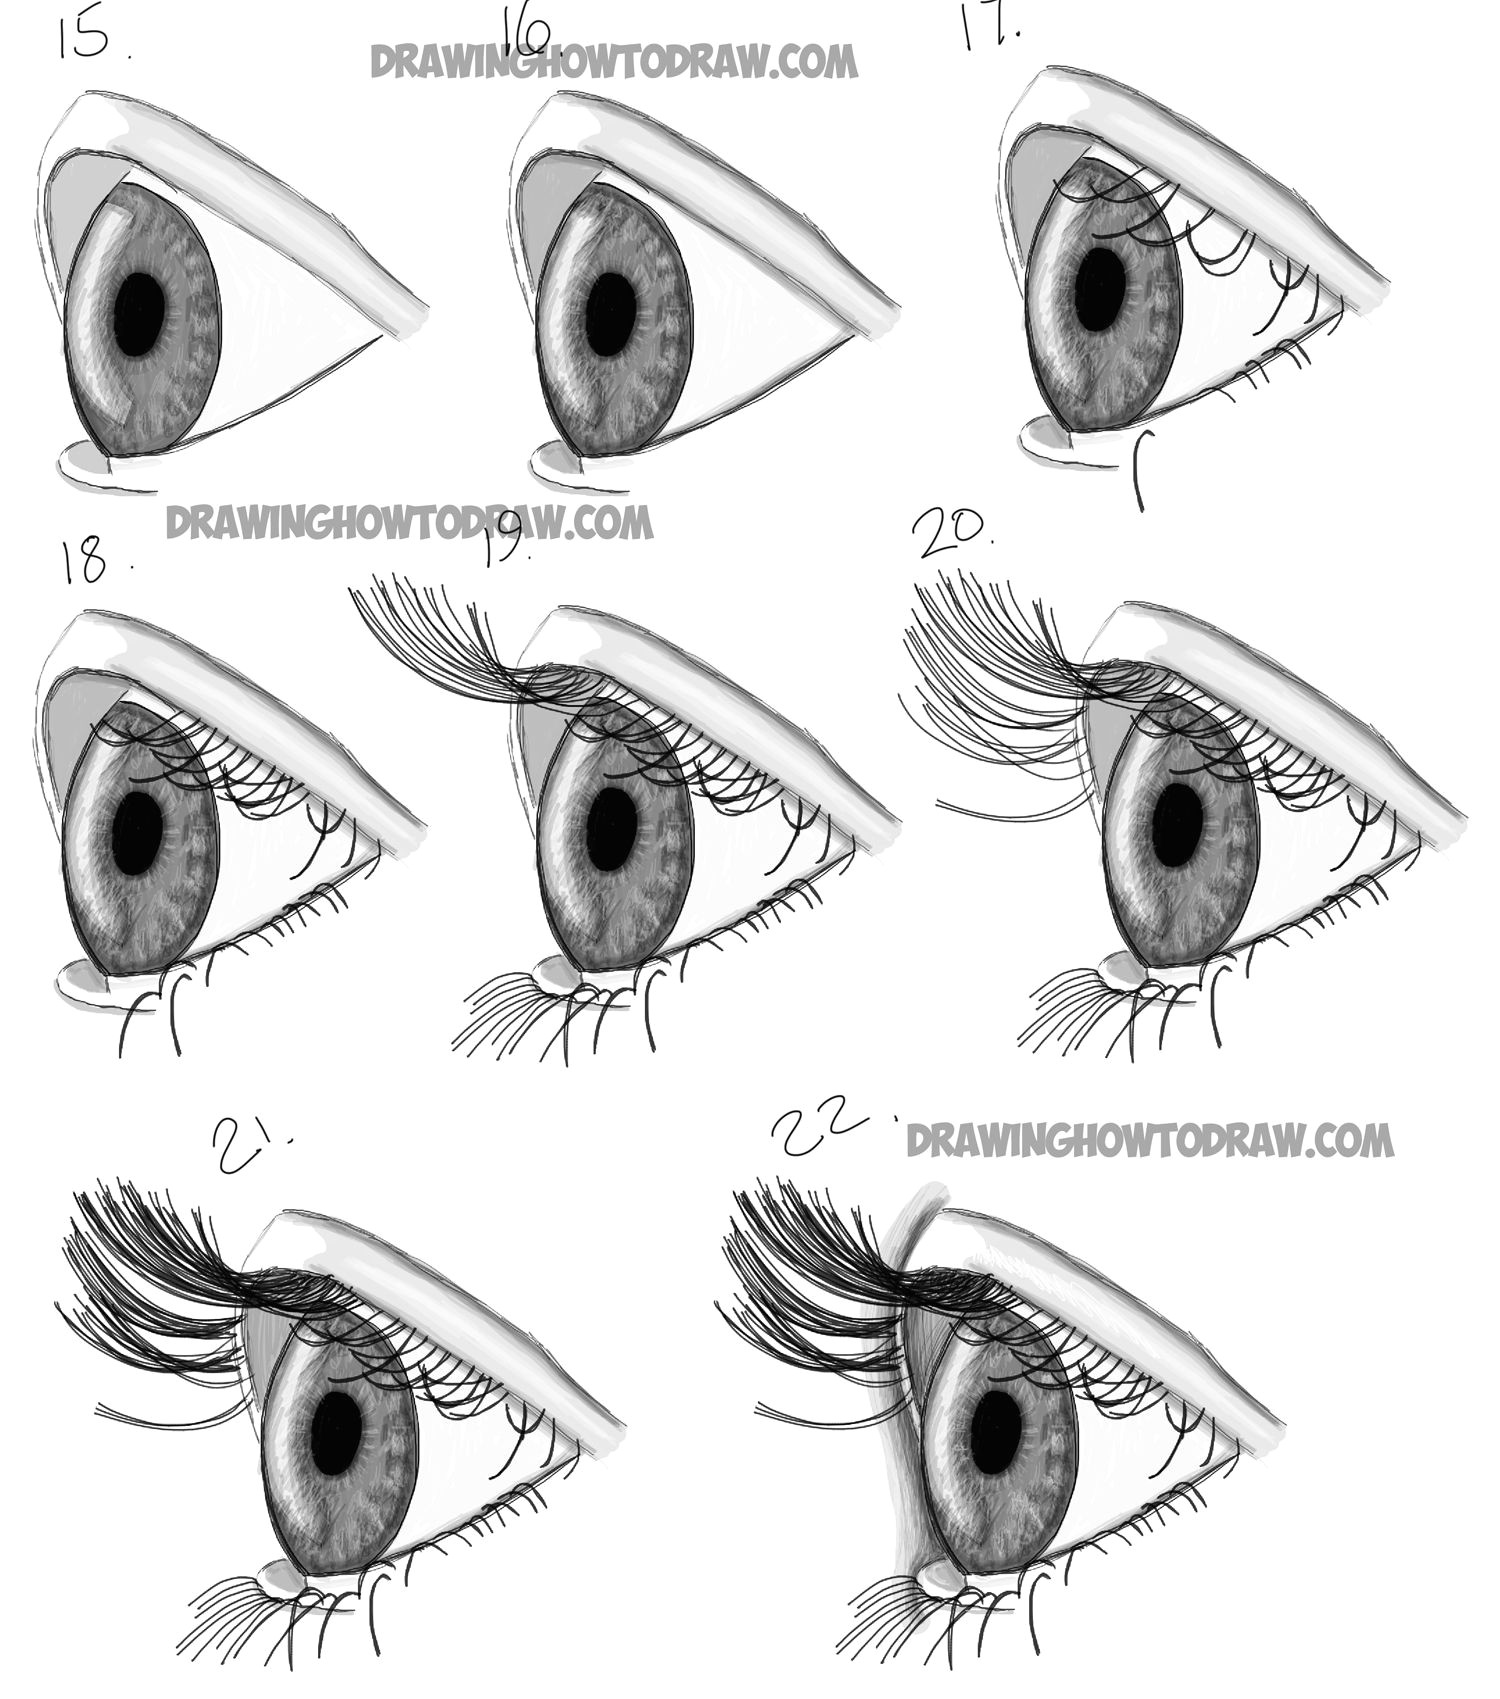 Drawing Eyes Reference How to Draw Realistic Eyes From the Side Profile View Step by Step